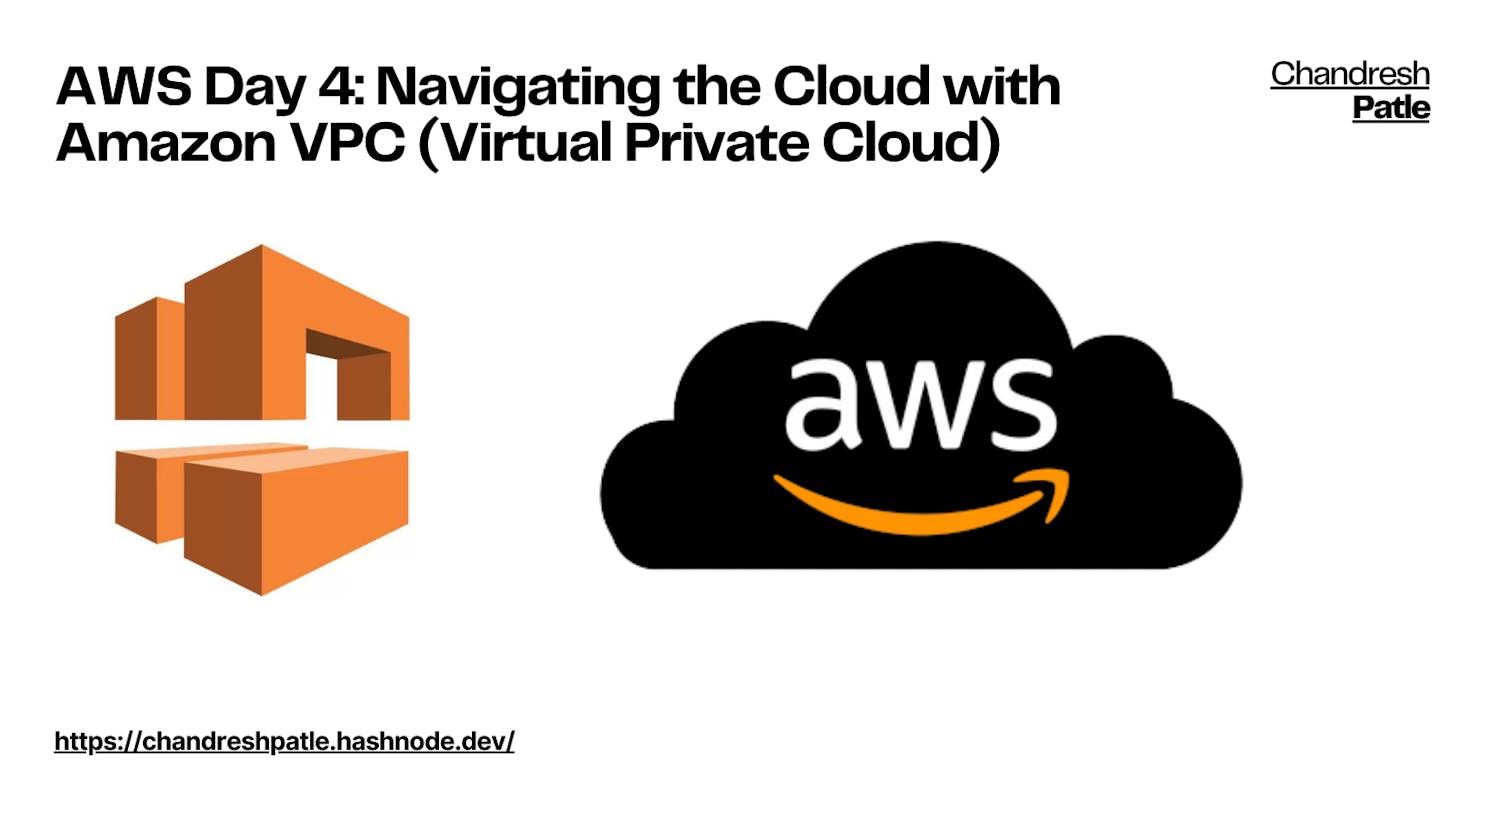 AWS Day 4: Navigating the Cloud with Amazon VPC (Virtual Private Cloud)